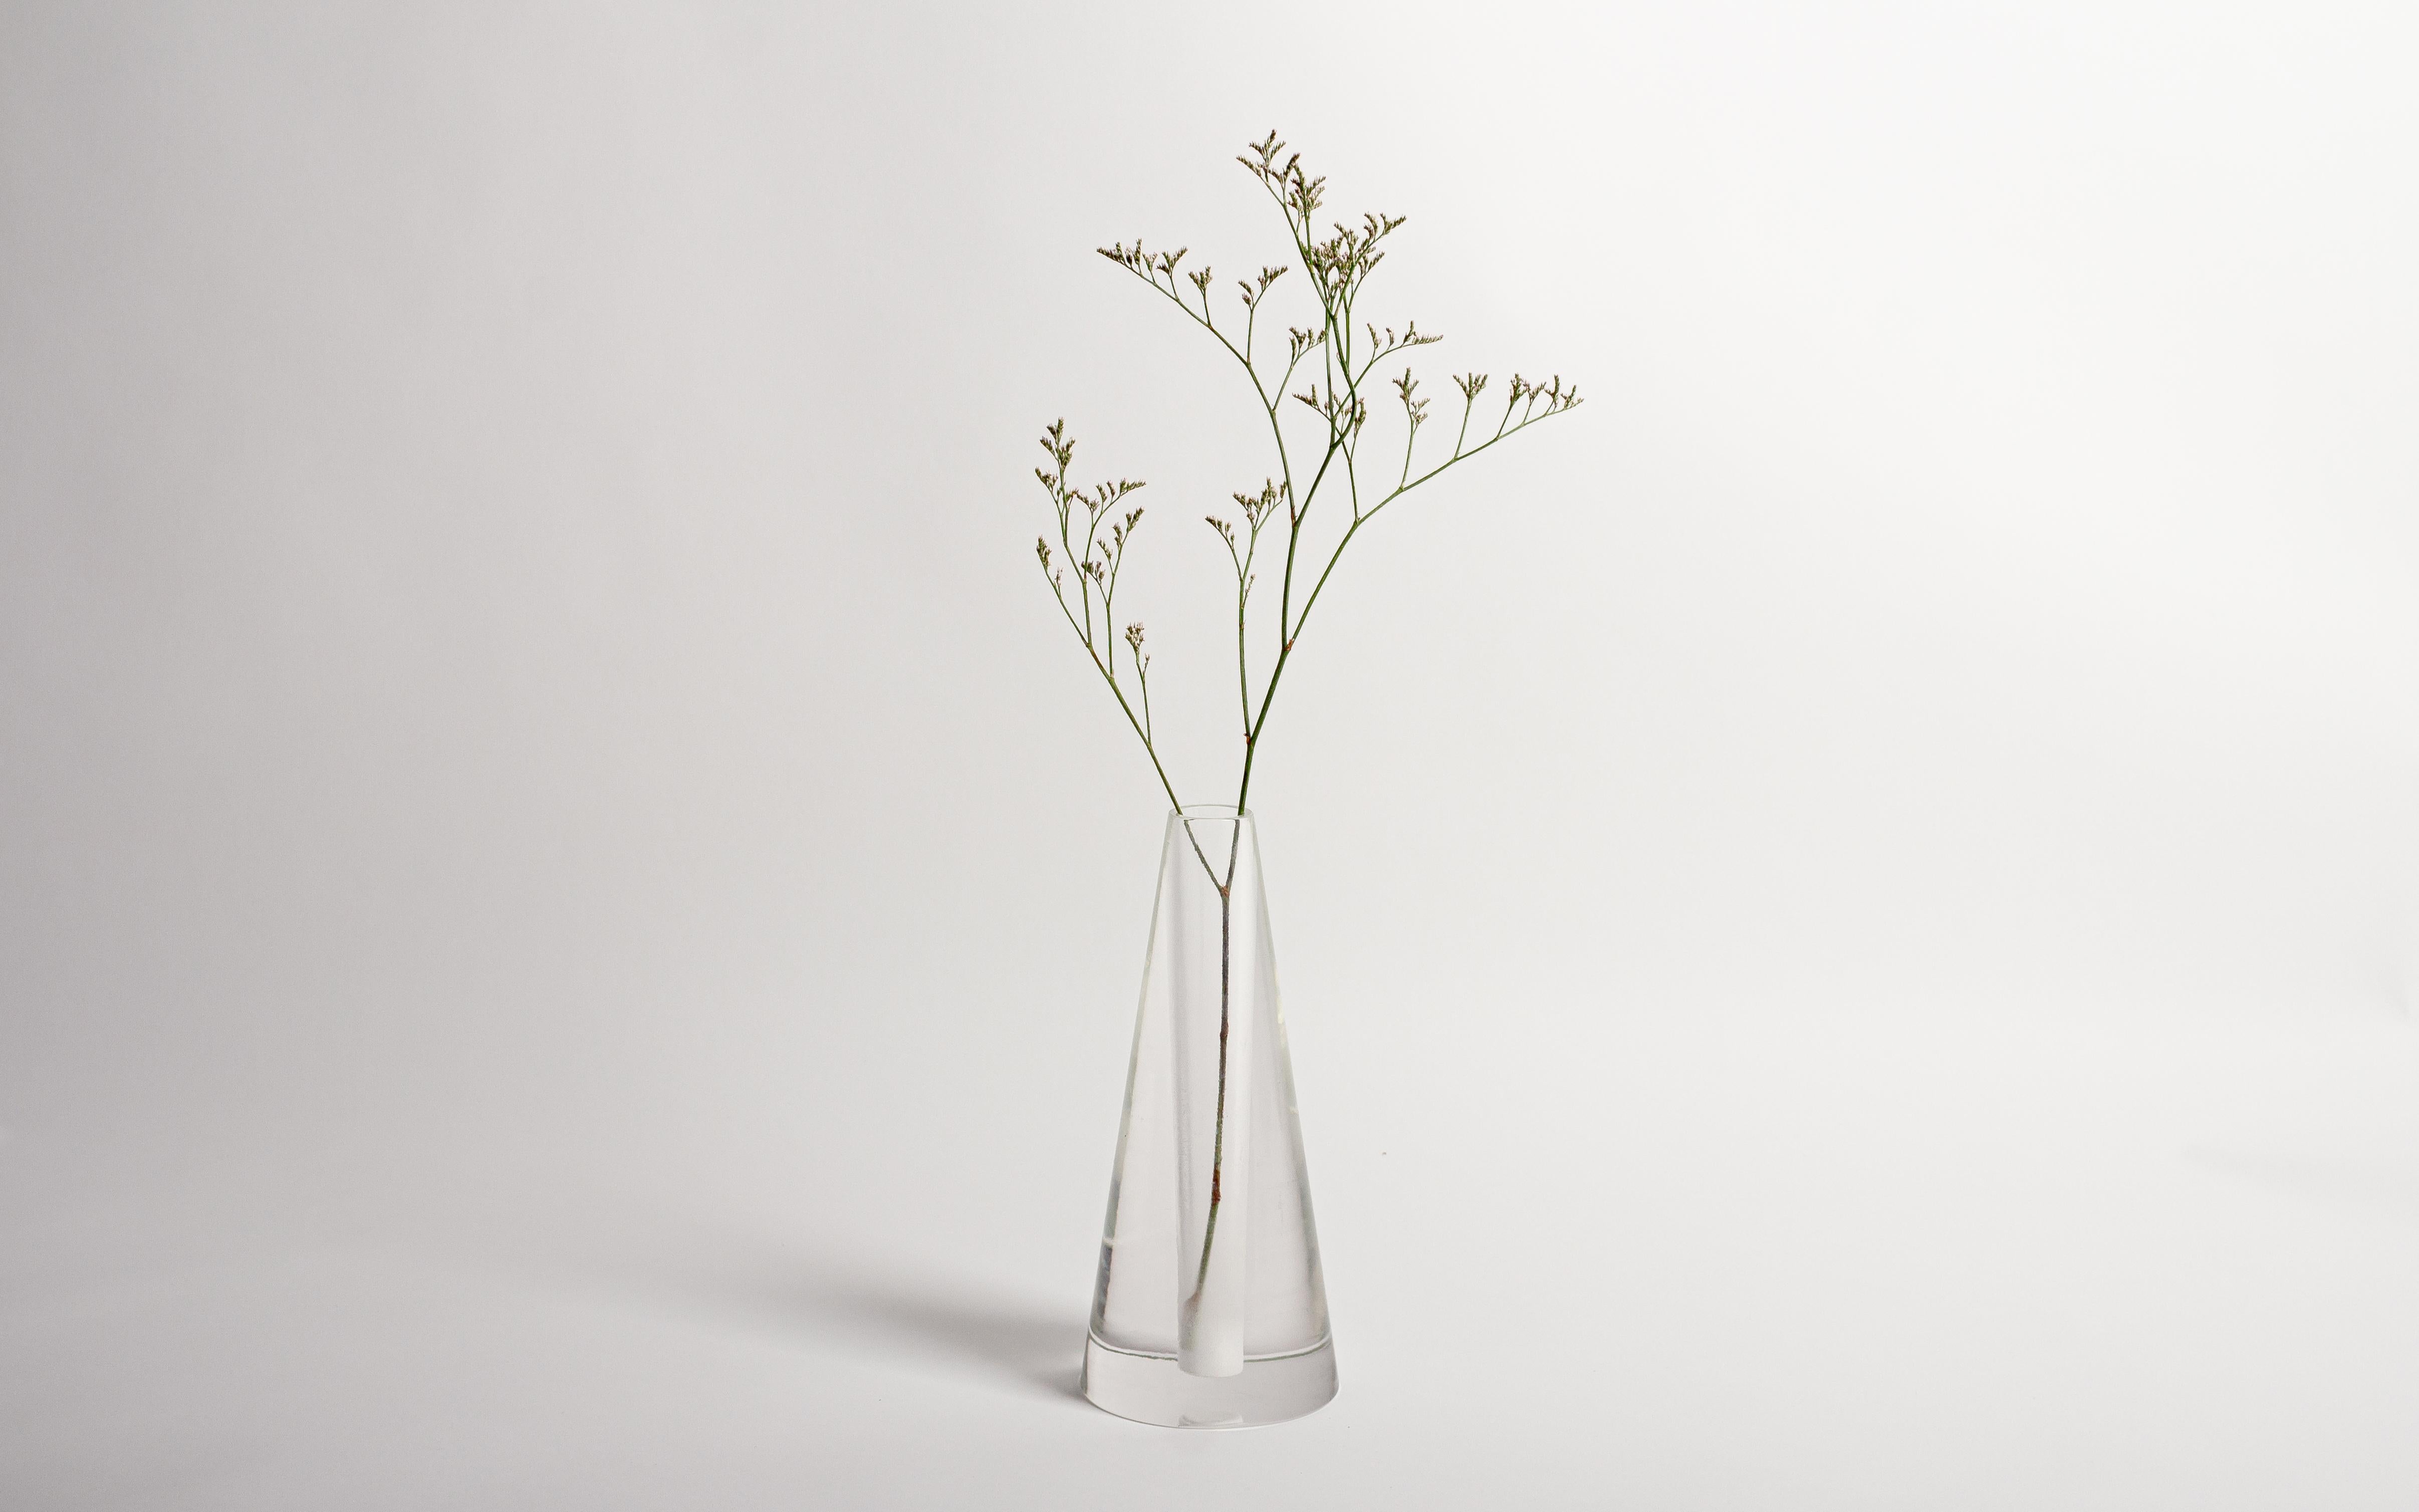 Sana vase small by Tom Fereday
Dimensions: D 12 x H 27.5 cm
Materials: Solid Cast Quartz Glass
Also available in clear frosted.

The SANA collection is the first ever home wares collection developed by designer Tom Fereday and was conducted